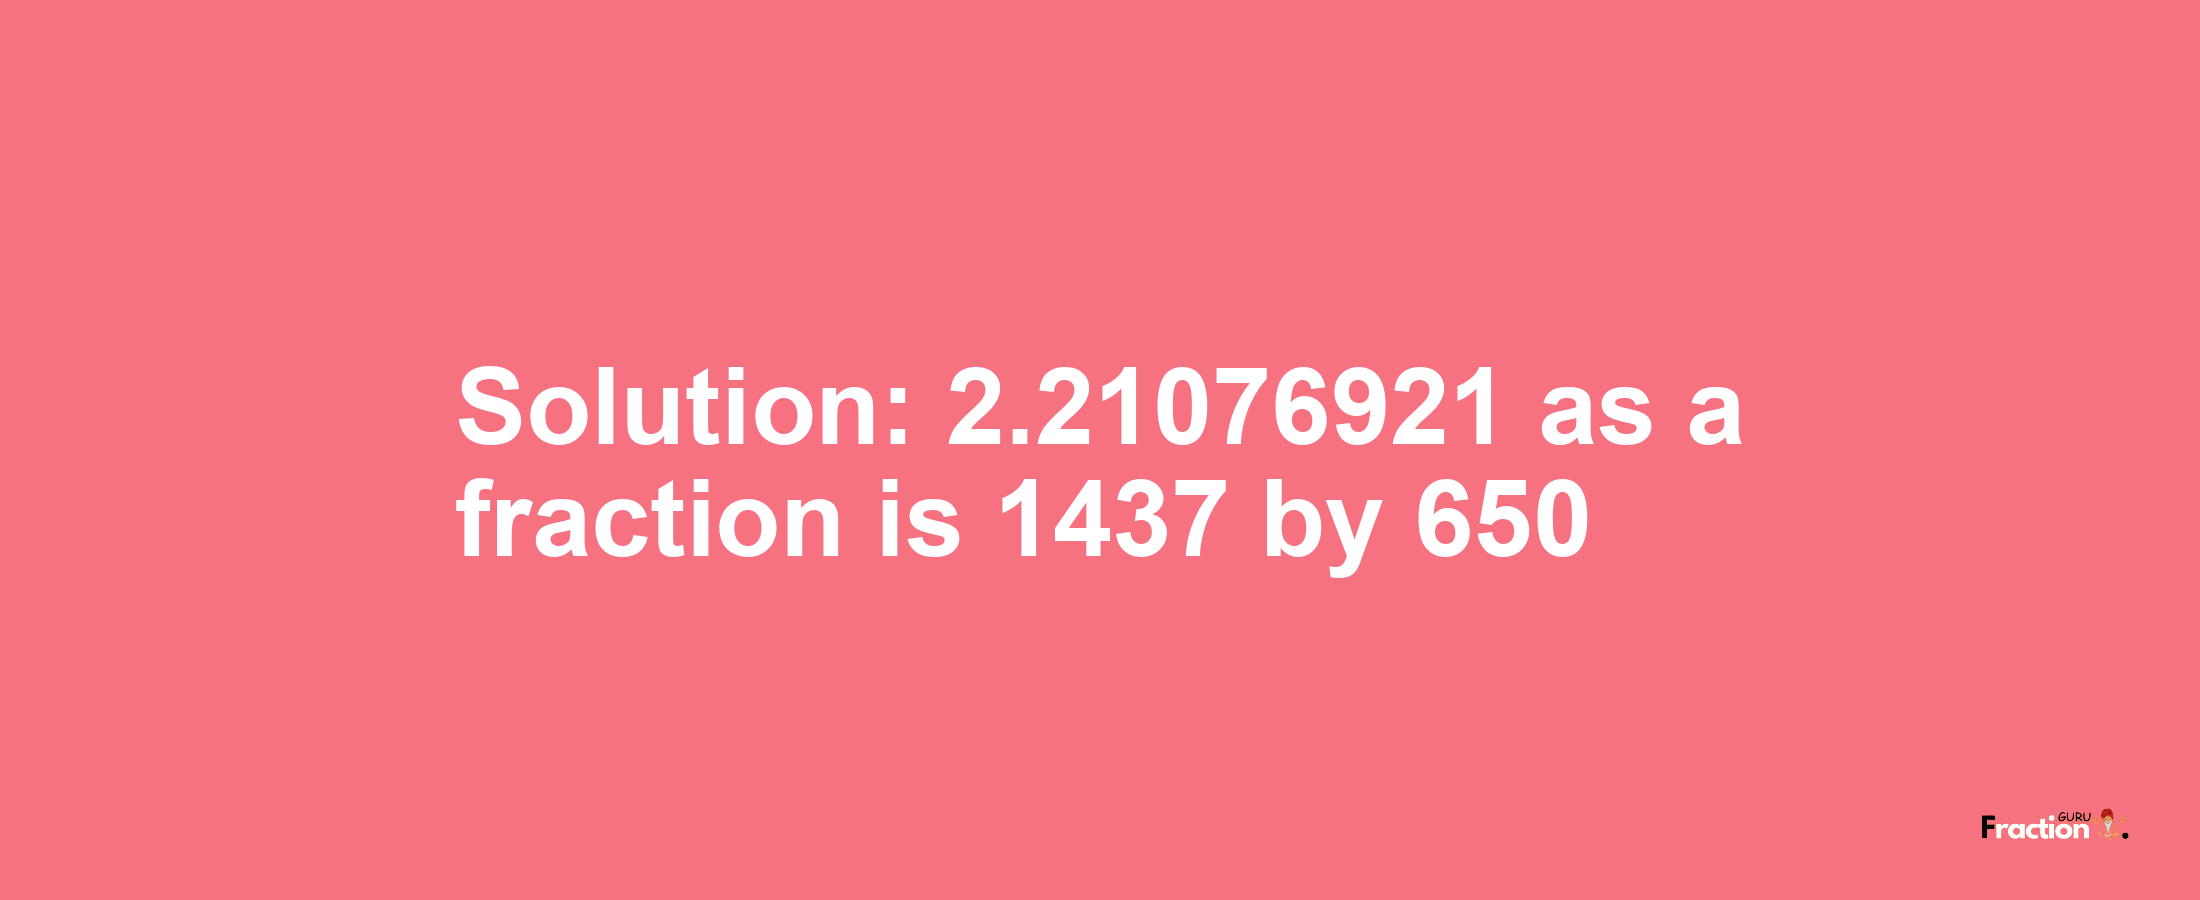 Solution:2.21076921 as a fraction is 1437/650